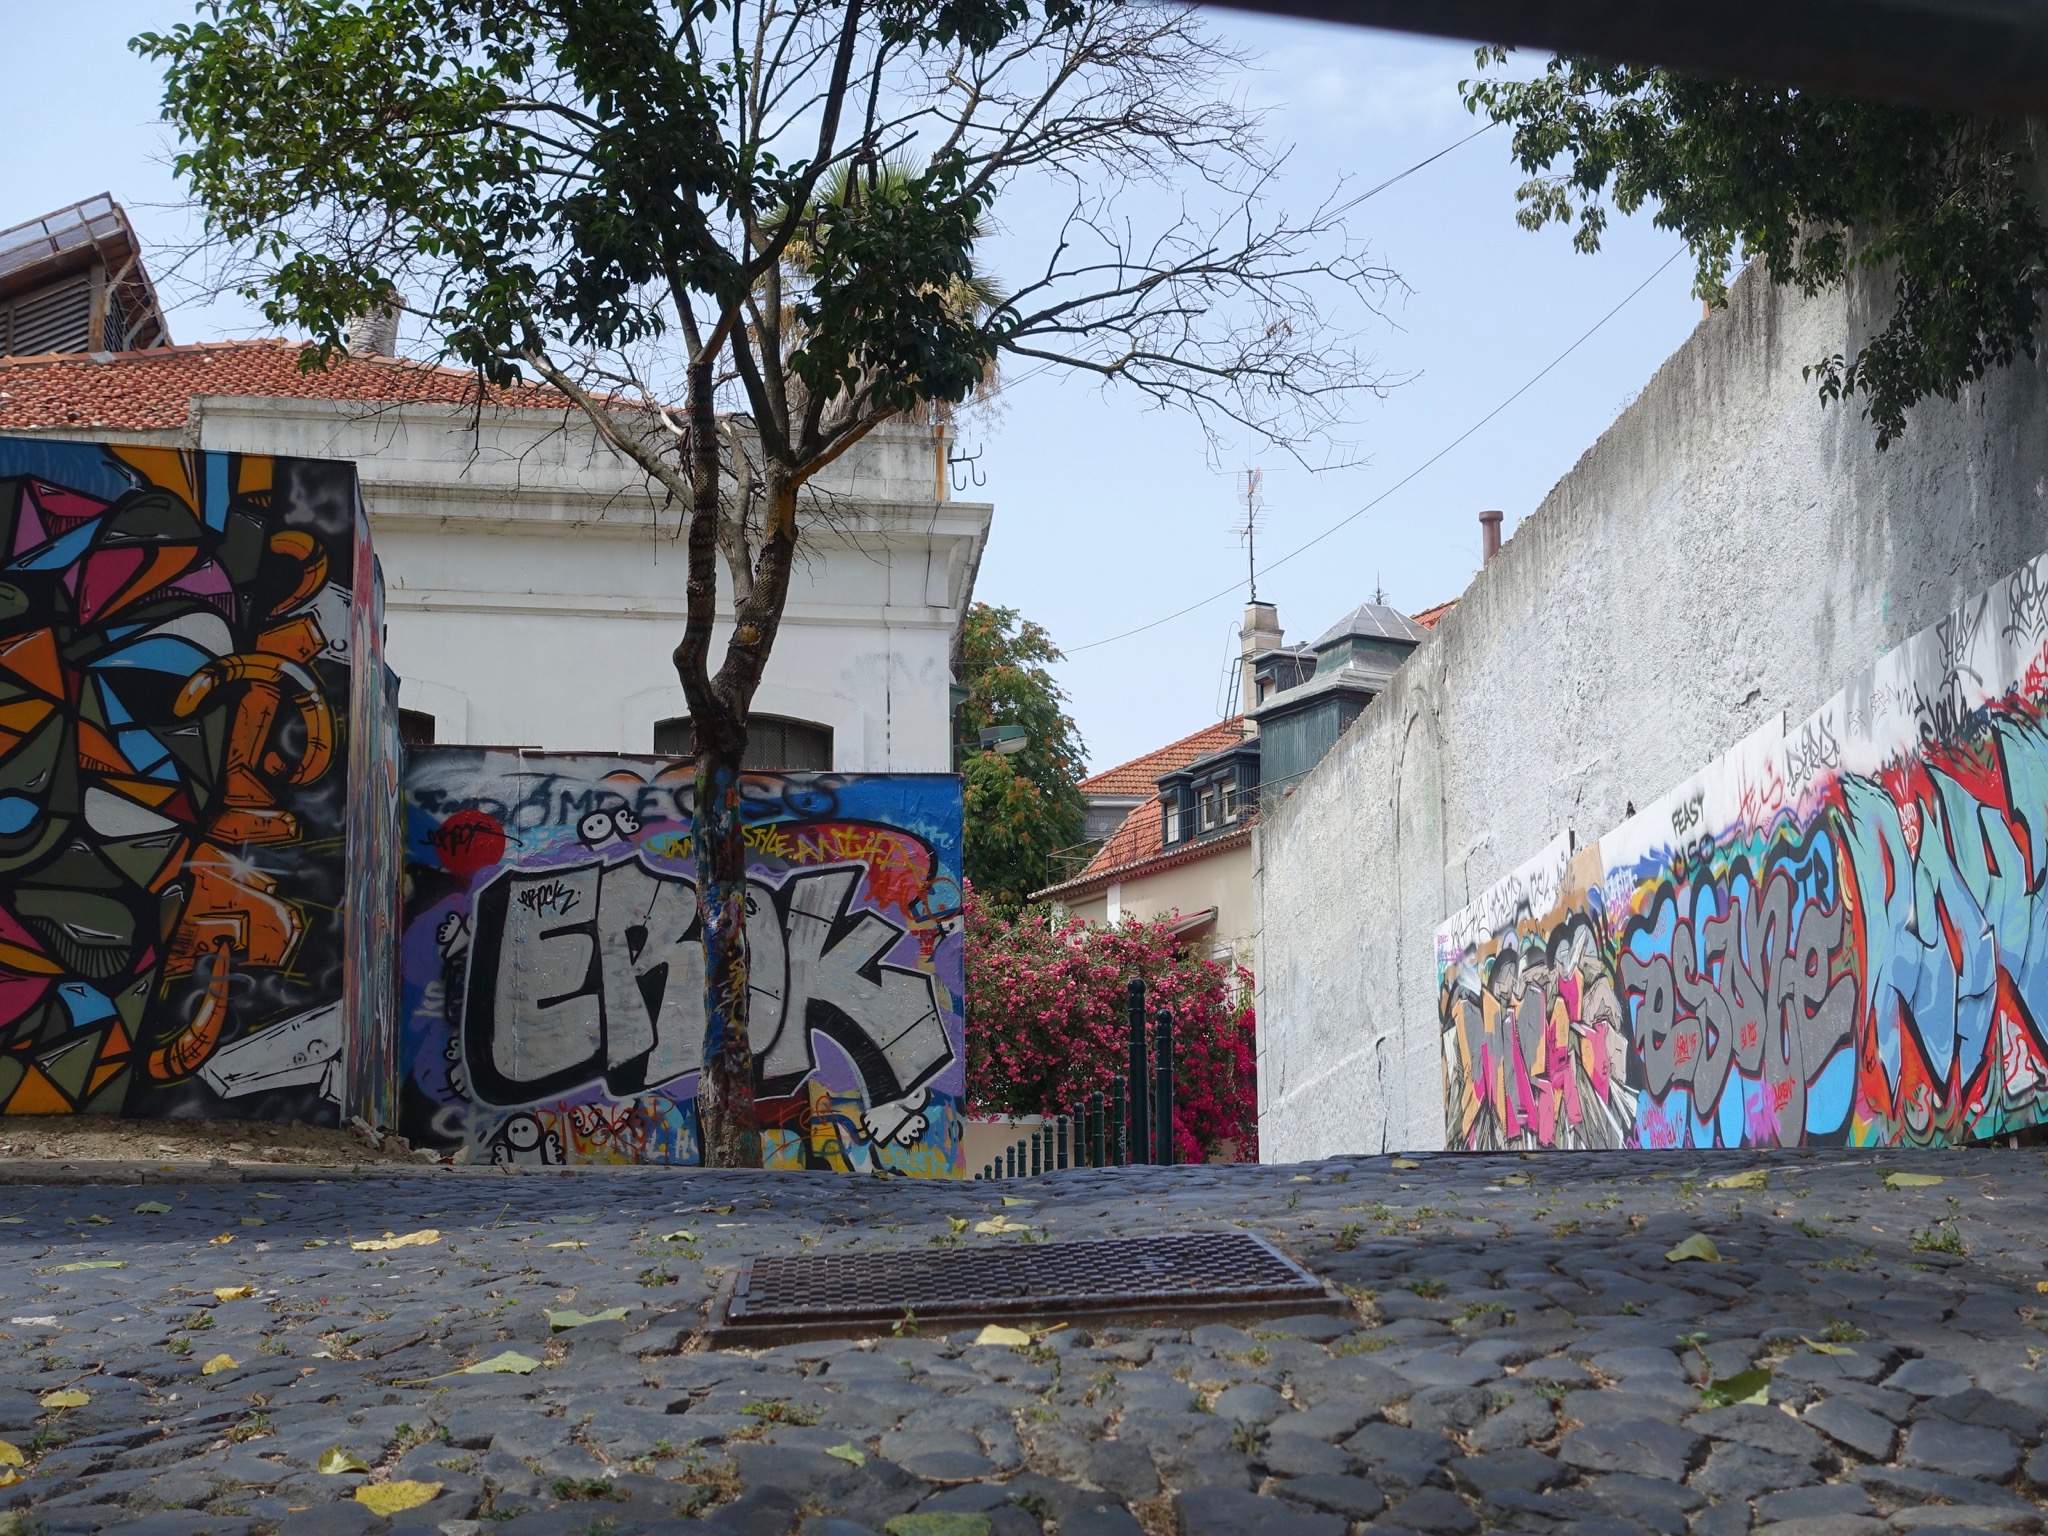 Photo 76 of 86 from the album Highlights Lisbon 2015.